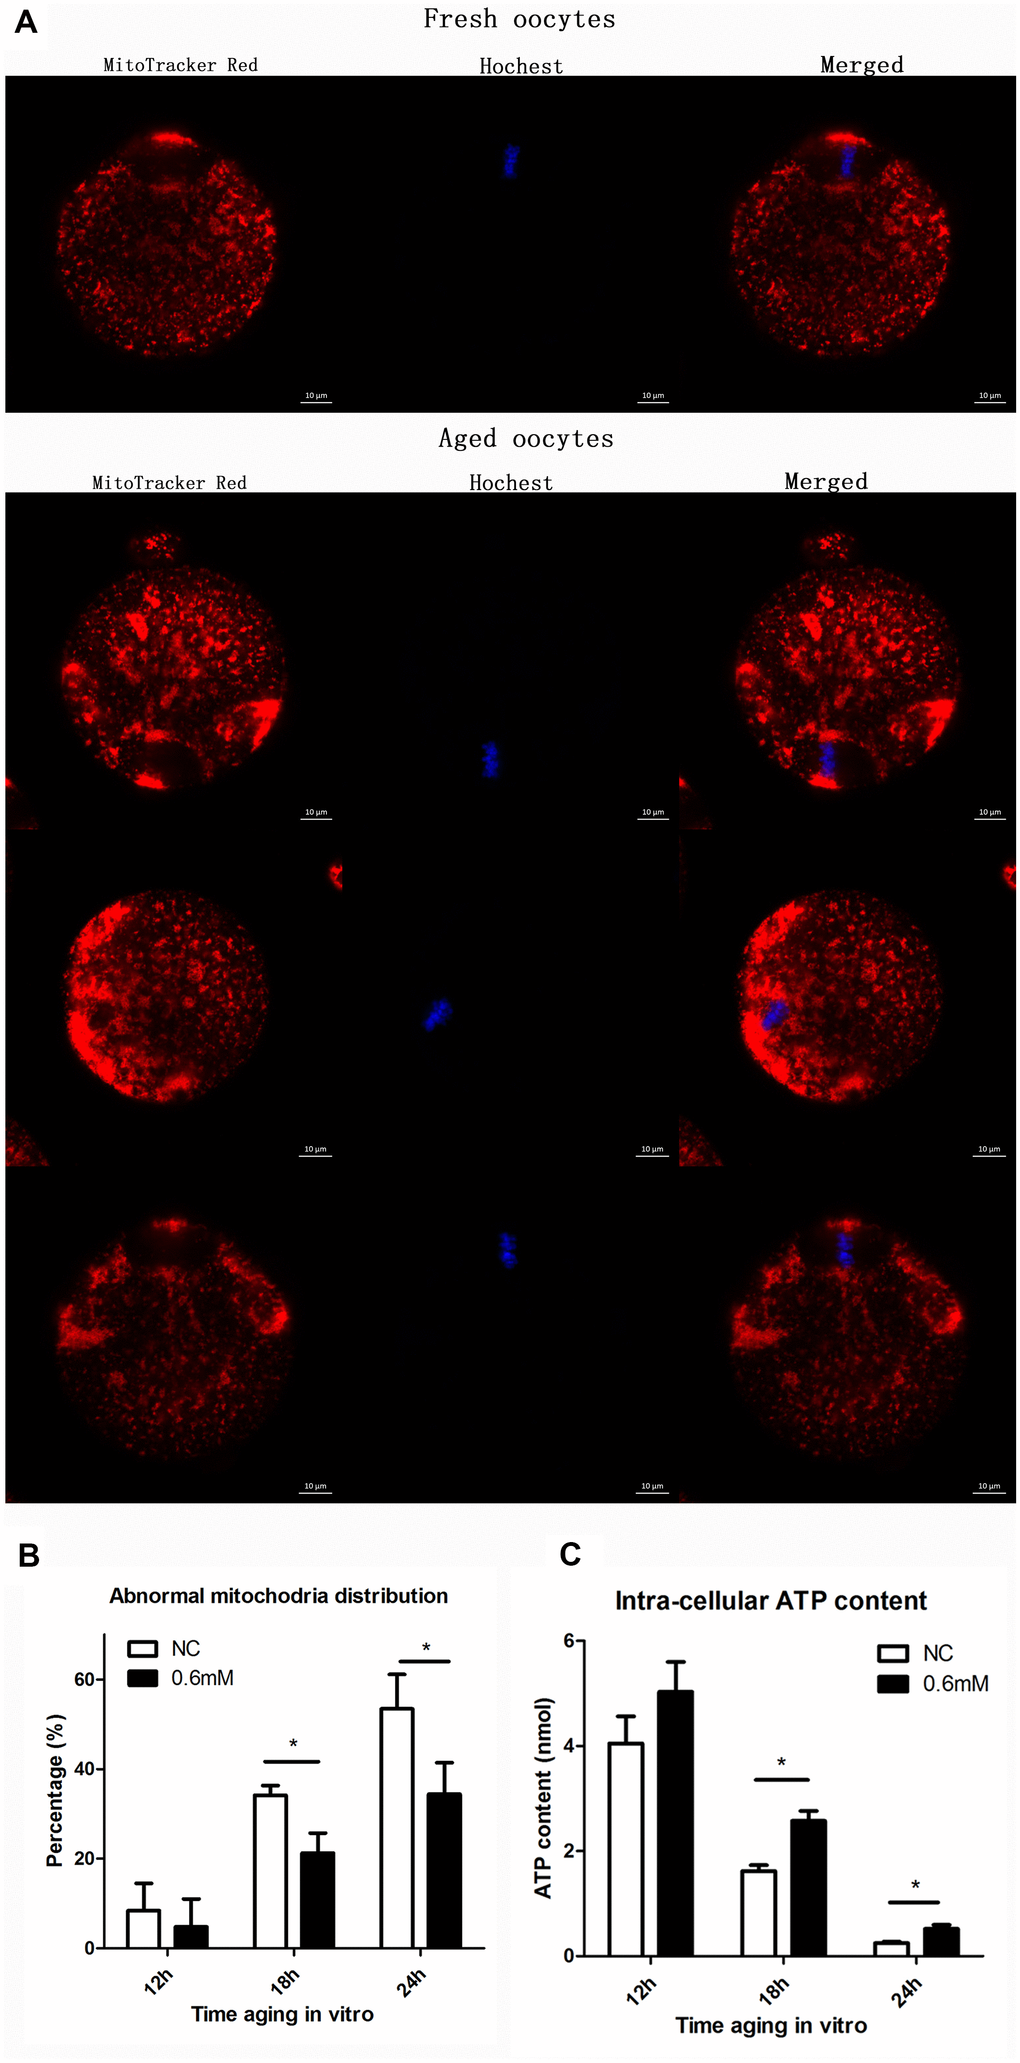 NAC treatment protects the function of mitochondria during post-ovulatory oocyte aging in vitro. (A) Confocal micrographs of mitochondrial distribution. Mitochondria were stained with MitoTracker-Red, and chromosomes were stained with Hoechst 33342 (blue). (B) Percentages of abnormal distribution of mitochondria in oocytes. Oocytes with normal mitochondria distribution and the those with abnormal mitochondira distribution were counted for calculating the percentage of abnormal mitochondria distribution found in oocytes in each experiment. NC, control group in which oocytes were not treated with NAC. 0.6mM, oocytes treated with 0.6mM NAC. Data are expressed as mean ± SEM of at least 3 independent experiments, and 6 superovulated mice were killed to obtain a minimum of 40 oocytes for each experiment. Star represents mean difference, 0.01C) The adenosine triphosphate (ATP) content of mouse oocyte at different aging time points of two groups with or without NAC treatment. A Berthold Lumat LB 9501 luminometer and a commercial assay kit were used for ATP measurement. Six superovulated mice were killed to obtain a minimum of 40 oocytes to investigate the mitochondria distribution for each independent replicates, and 14 superovulated mice were killed to obtain a minimum of 100 oocytes to analyze the ATP content for each independent replicate.